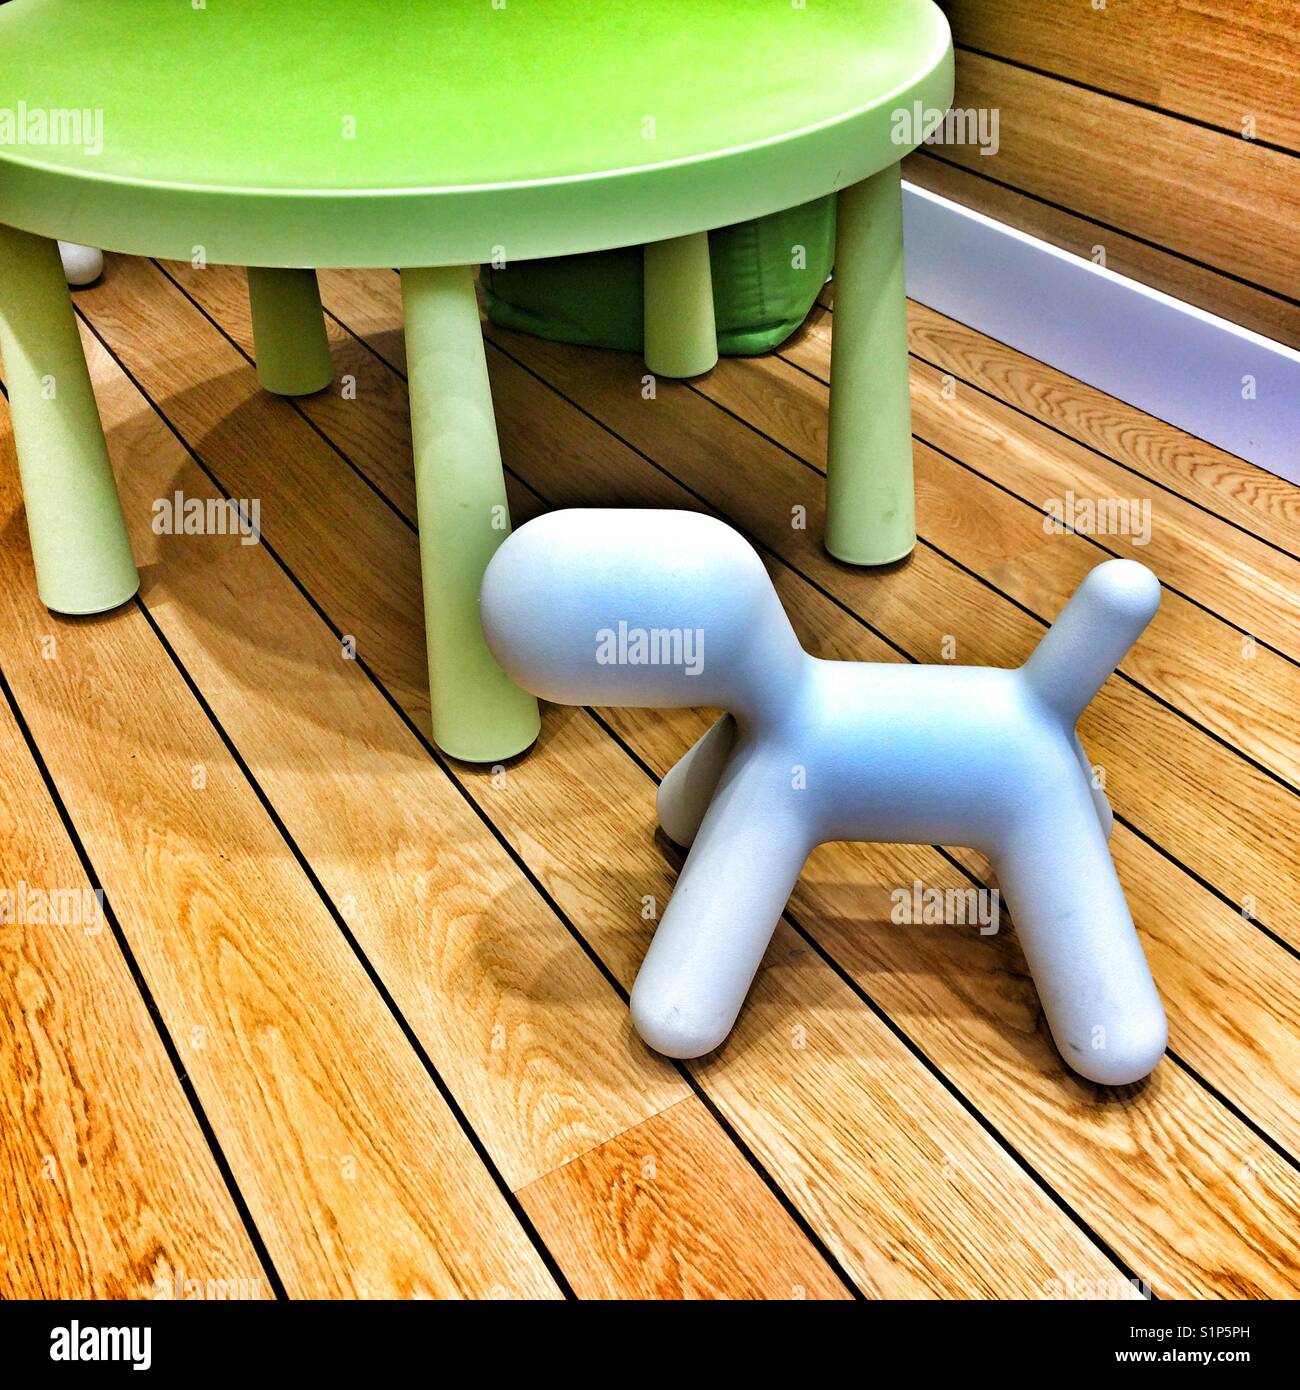 Toy dog and table on wooden floor Stock Photo